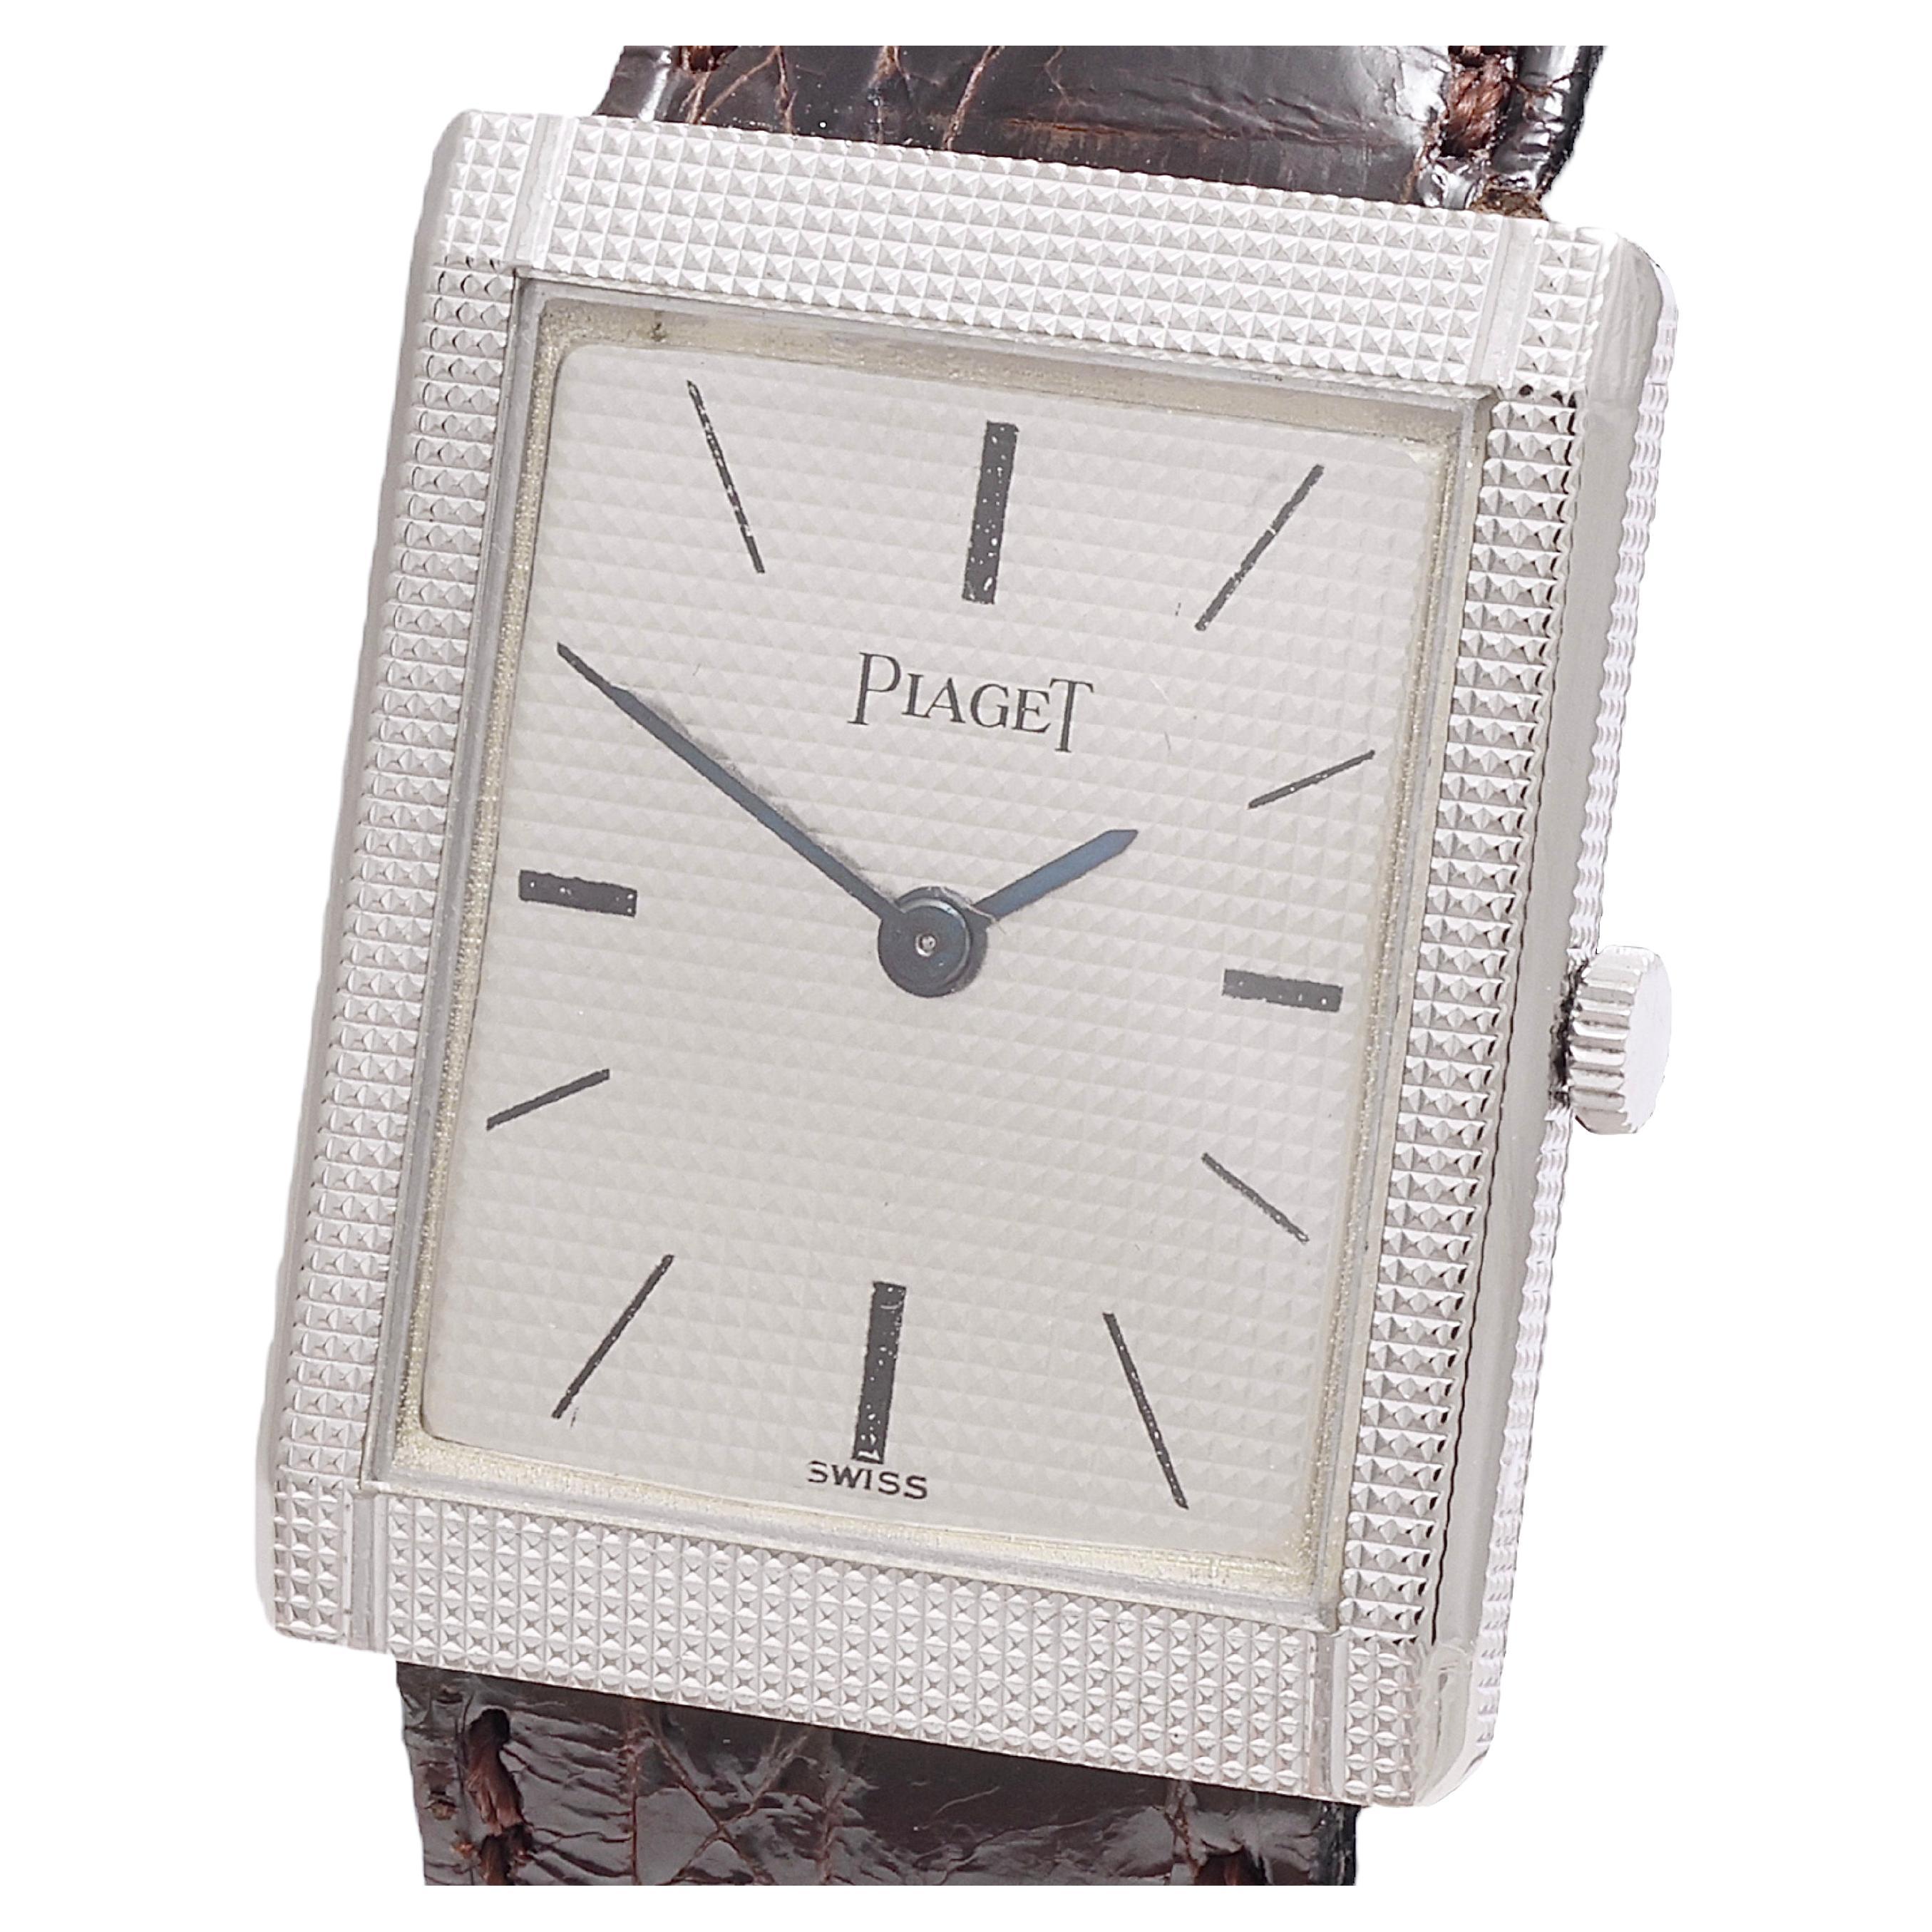 18 kt. White Gold Piaget Wrist Watch, Manual Winding Ultra Thin, Collectors